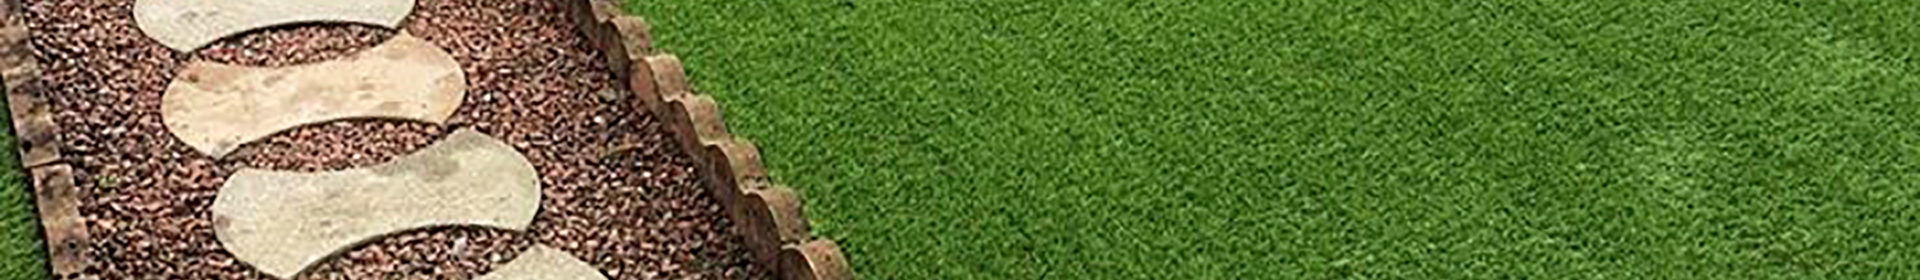 Domestic and Commercial Artificial Grass from Woodvale Groundworks.